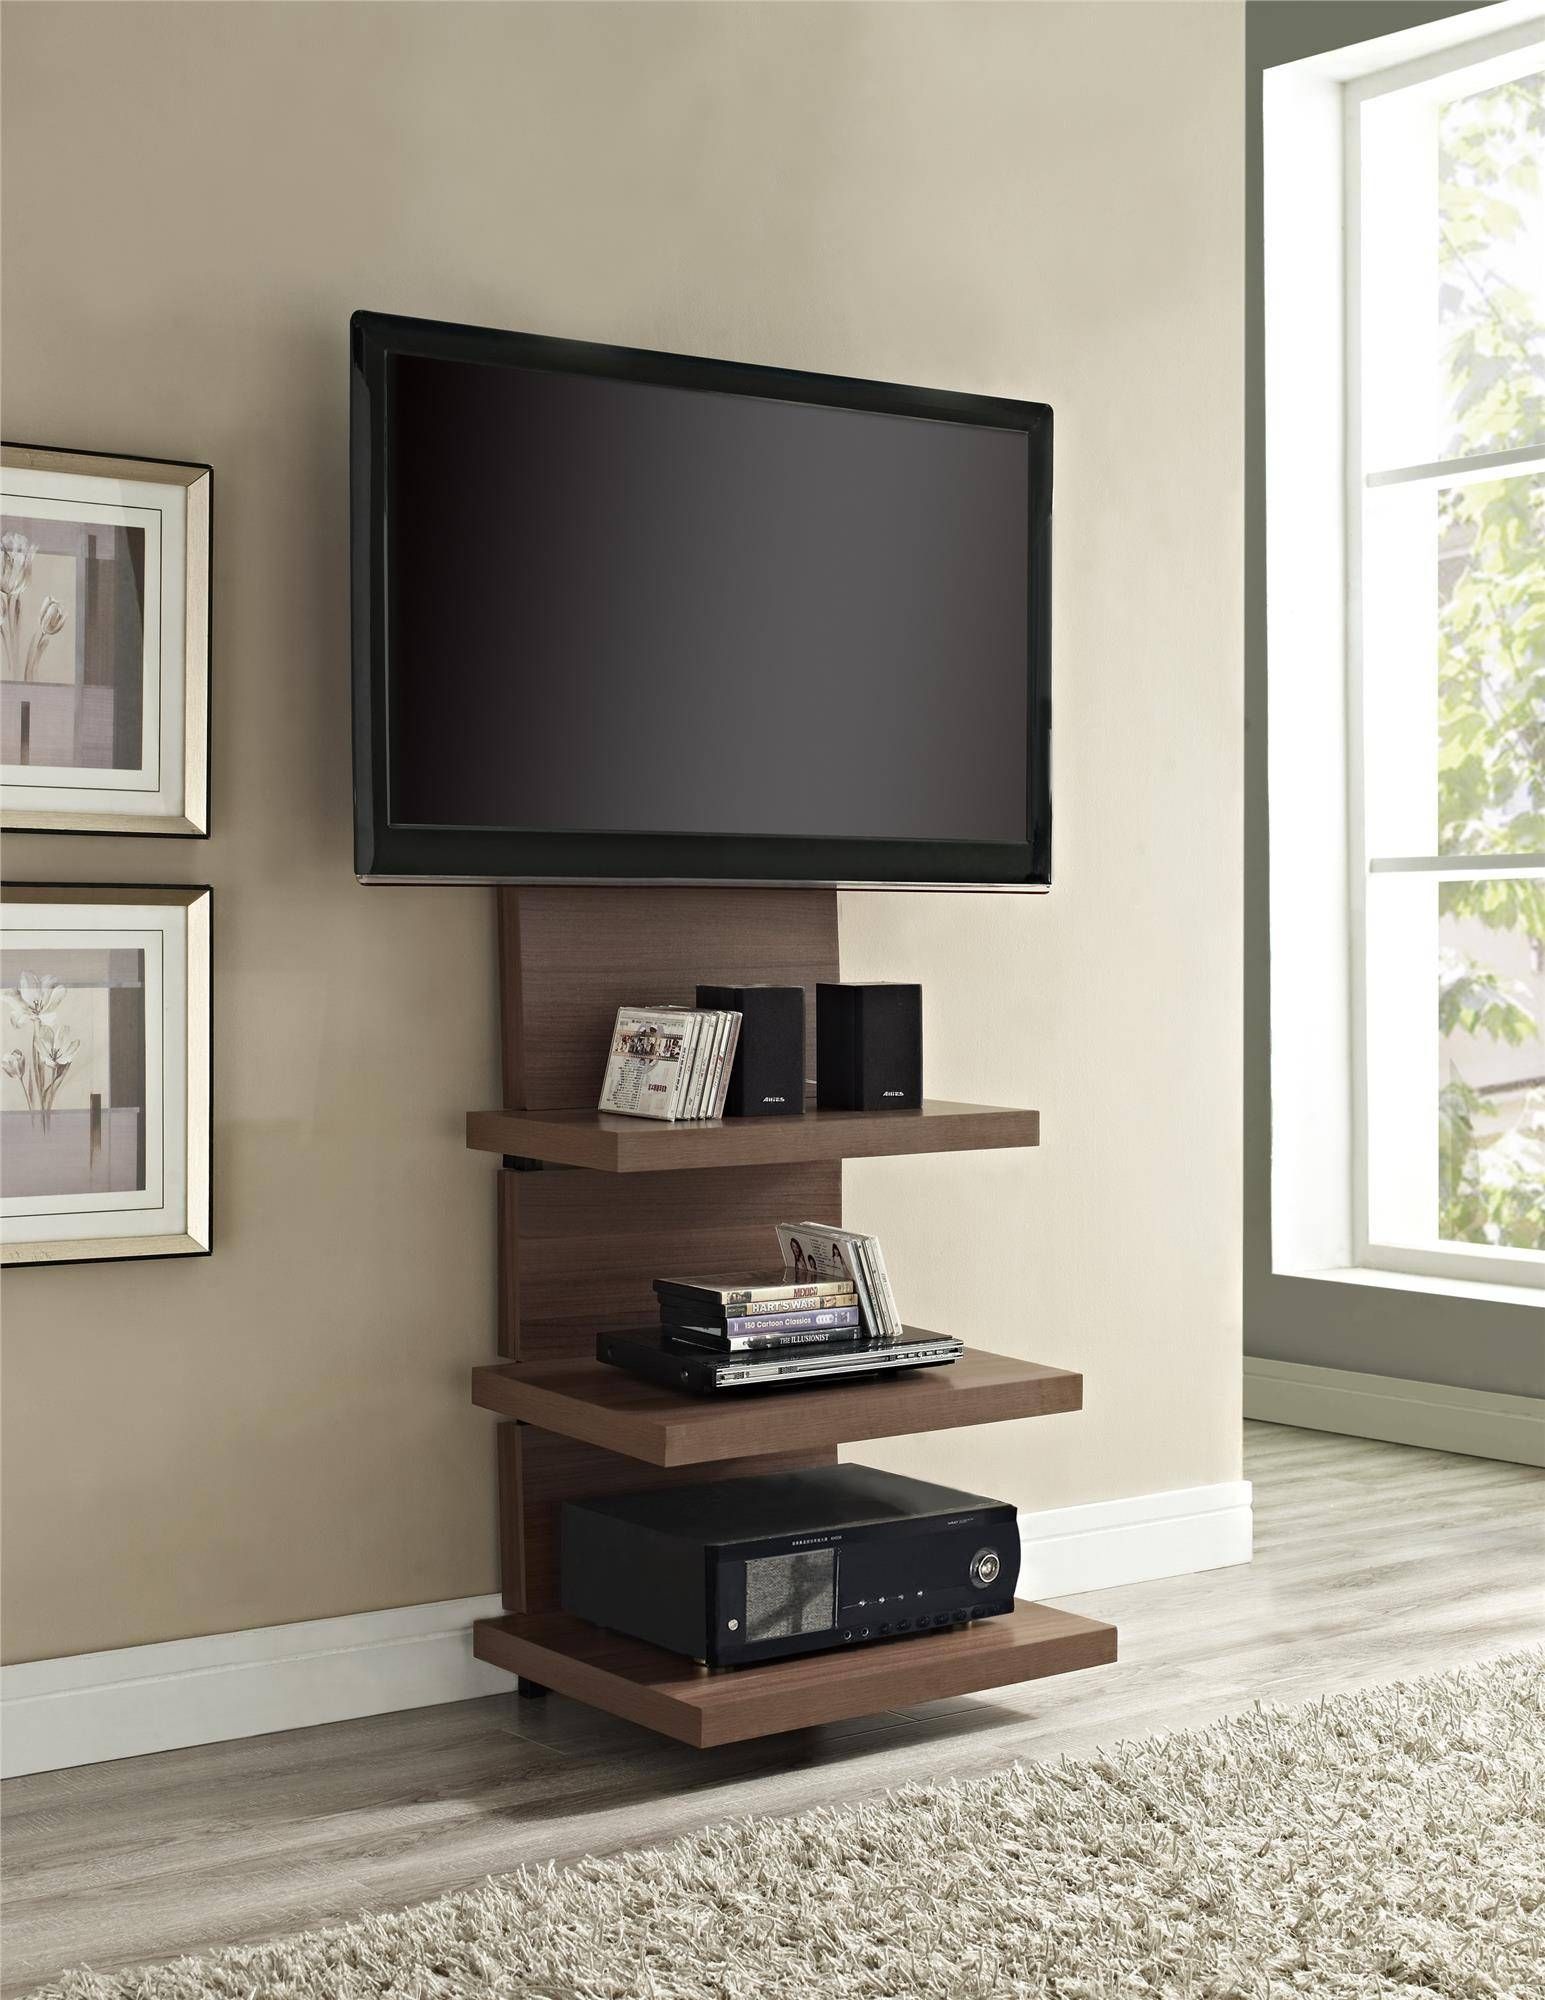 Tall Wood Wall Mounted Tv Stand With Shelves And Mount For Flat With Unique Tv Stands For Flat Screens (View 5 of 15)